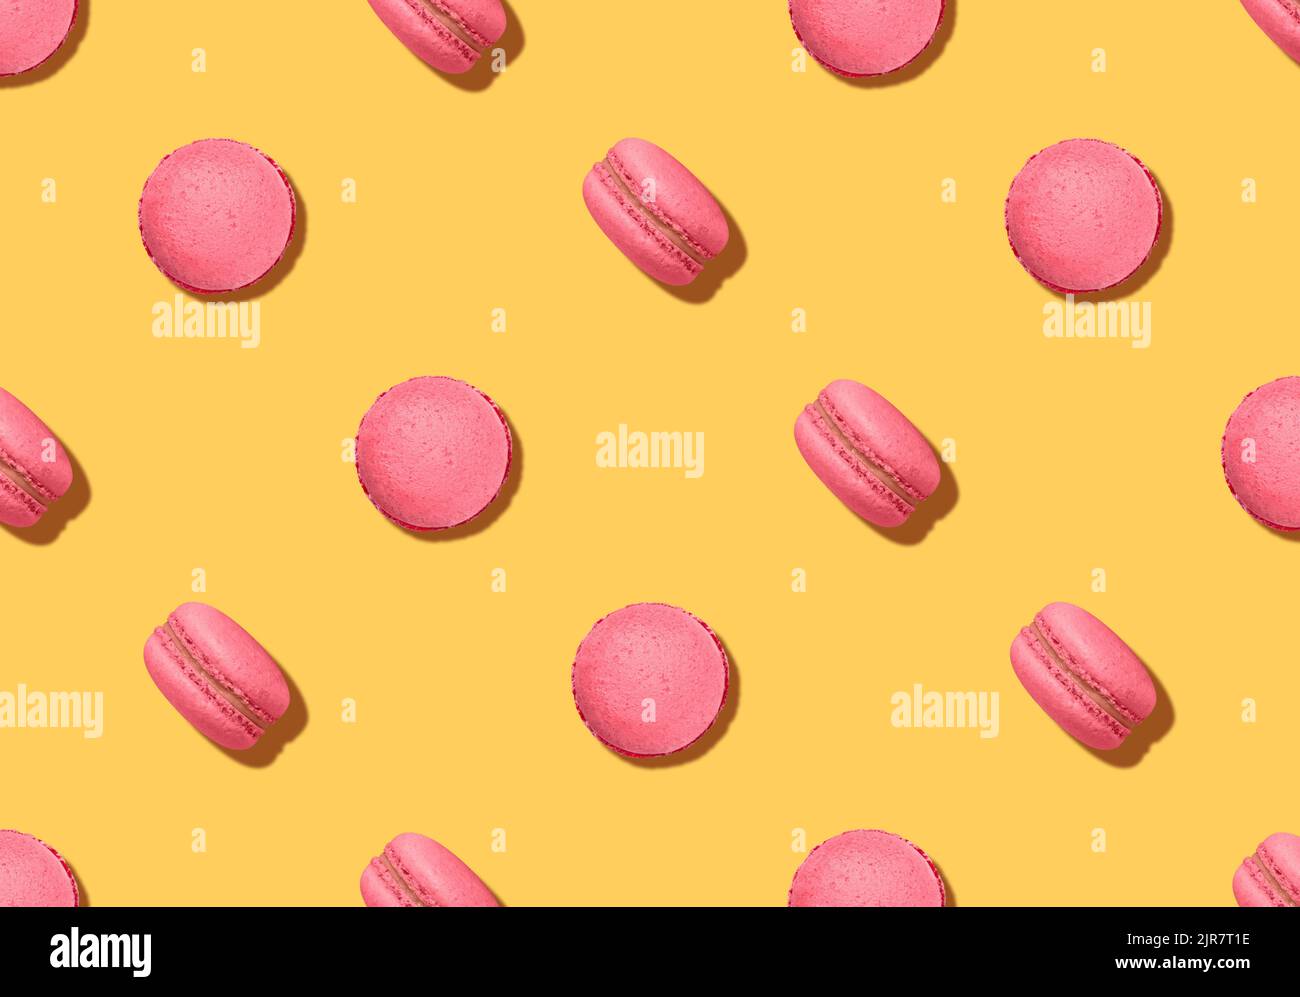 Pattern with almond cookies. Pink colored macaroons on bright yellow backdrop Stock Photo